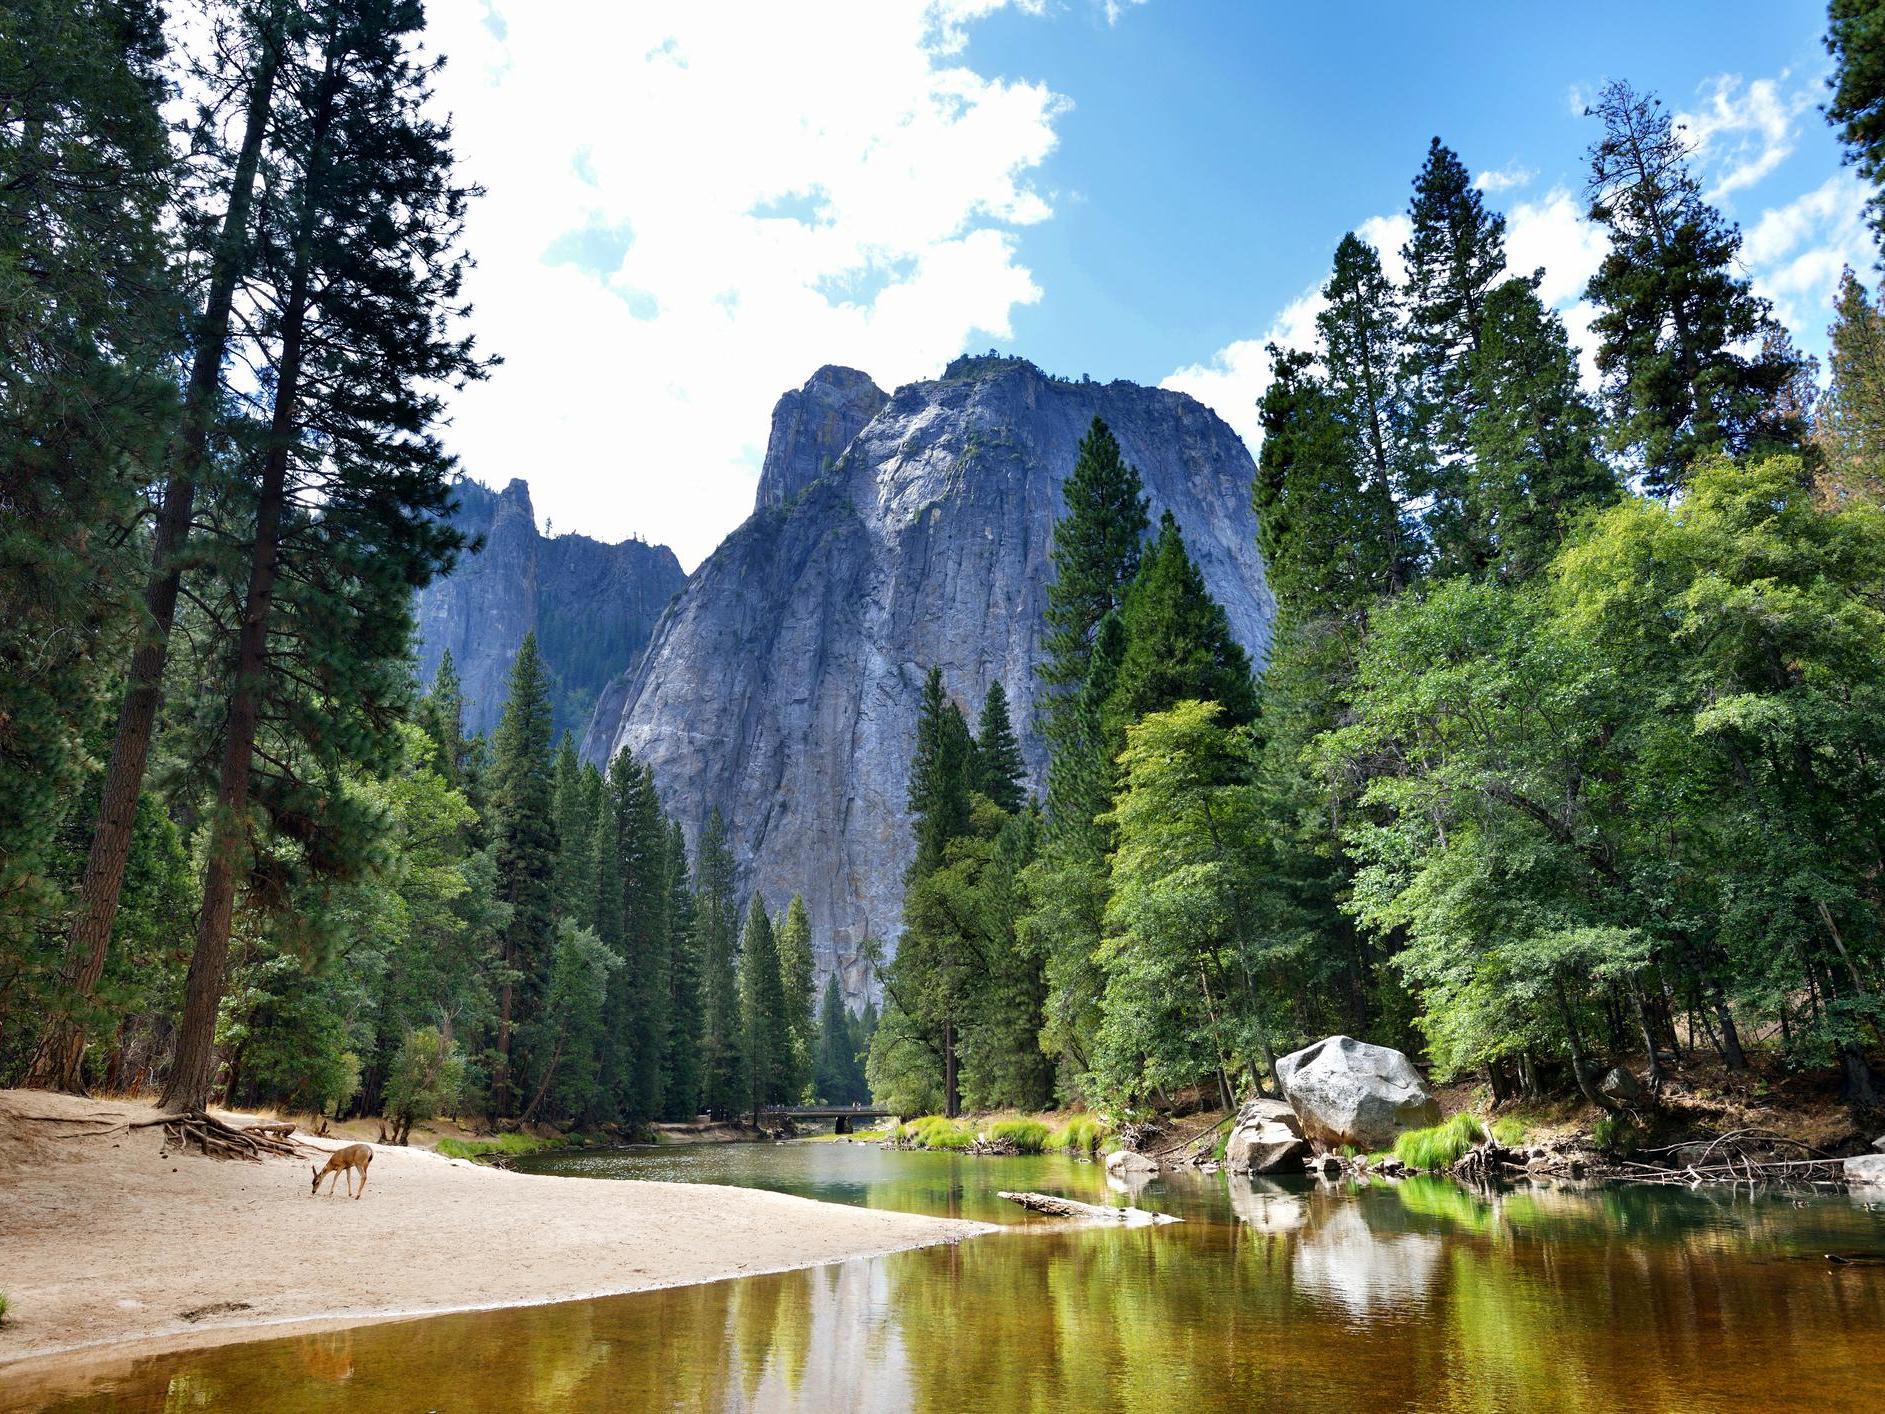 Yosemite National Park covers more than 1,000 square miles, with 95 per cent of its land designated wilderness (Getty)